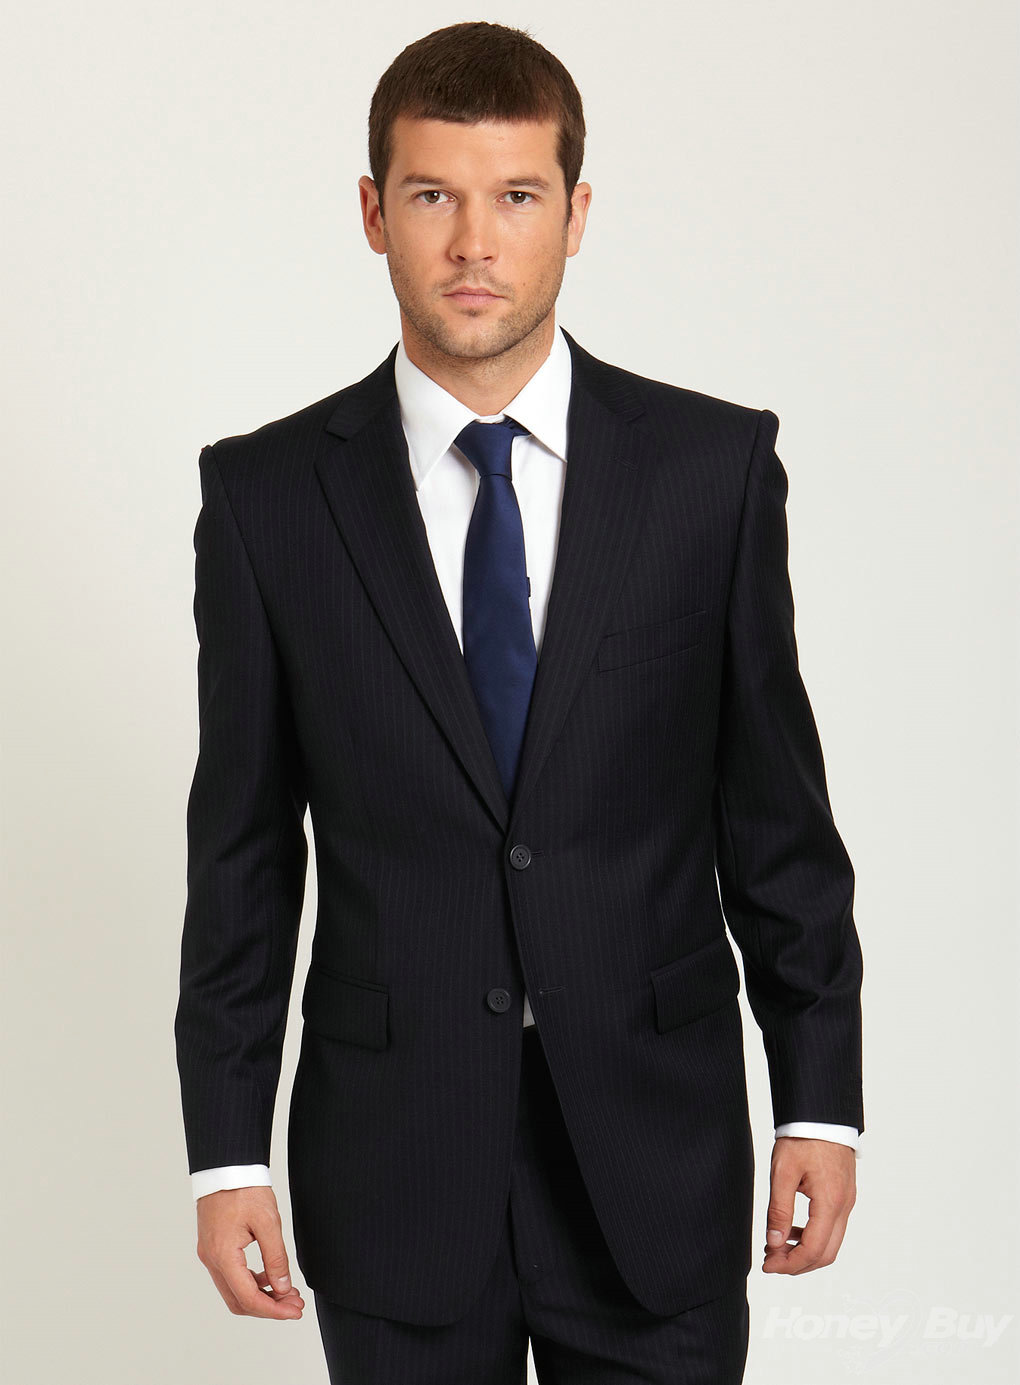 classic new arrival design notch lapel pinstripe business suit dyolbwy